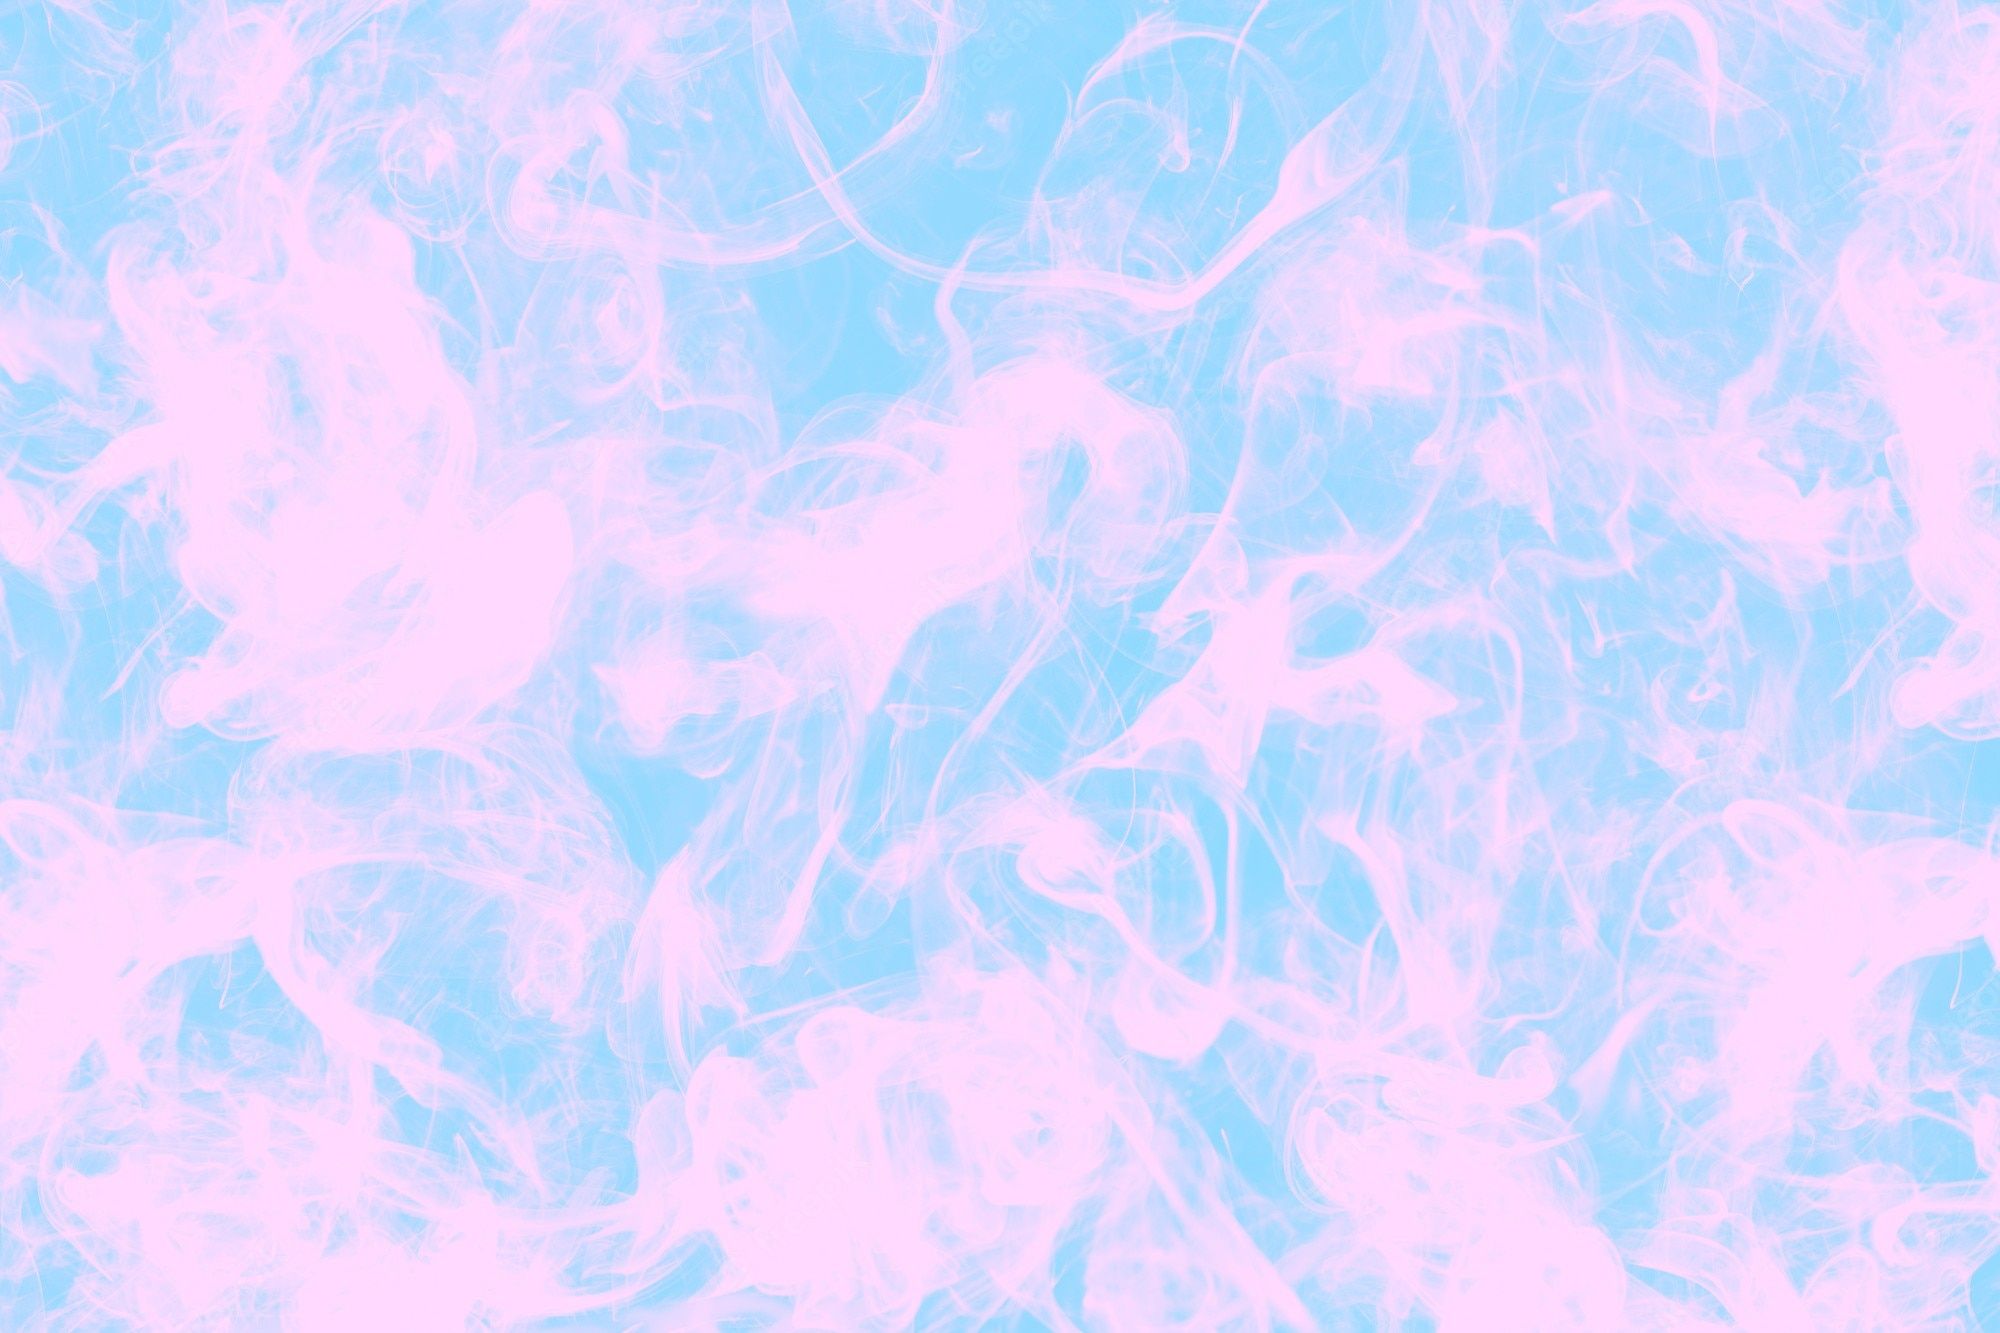 A blue and pink abstract background - Profile picture